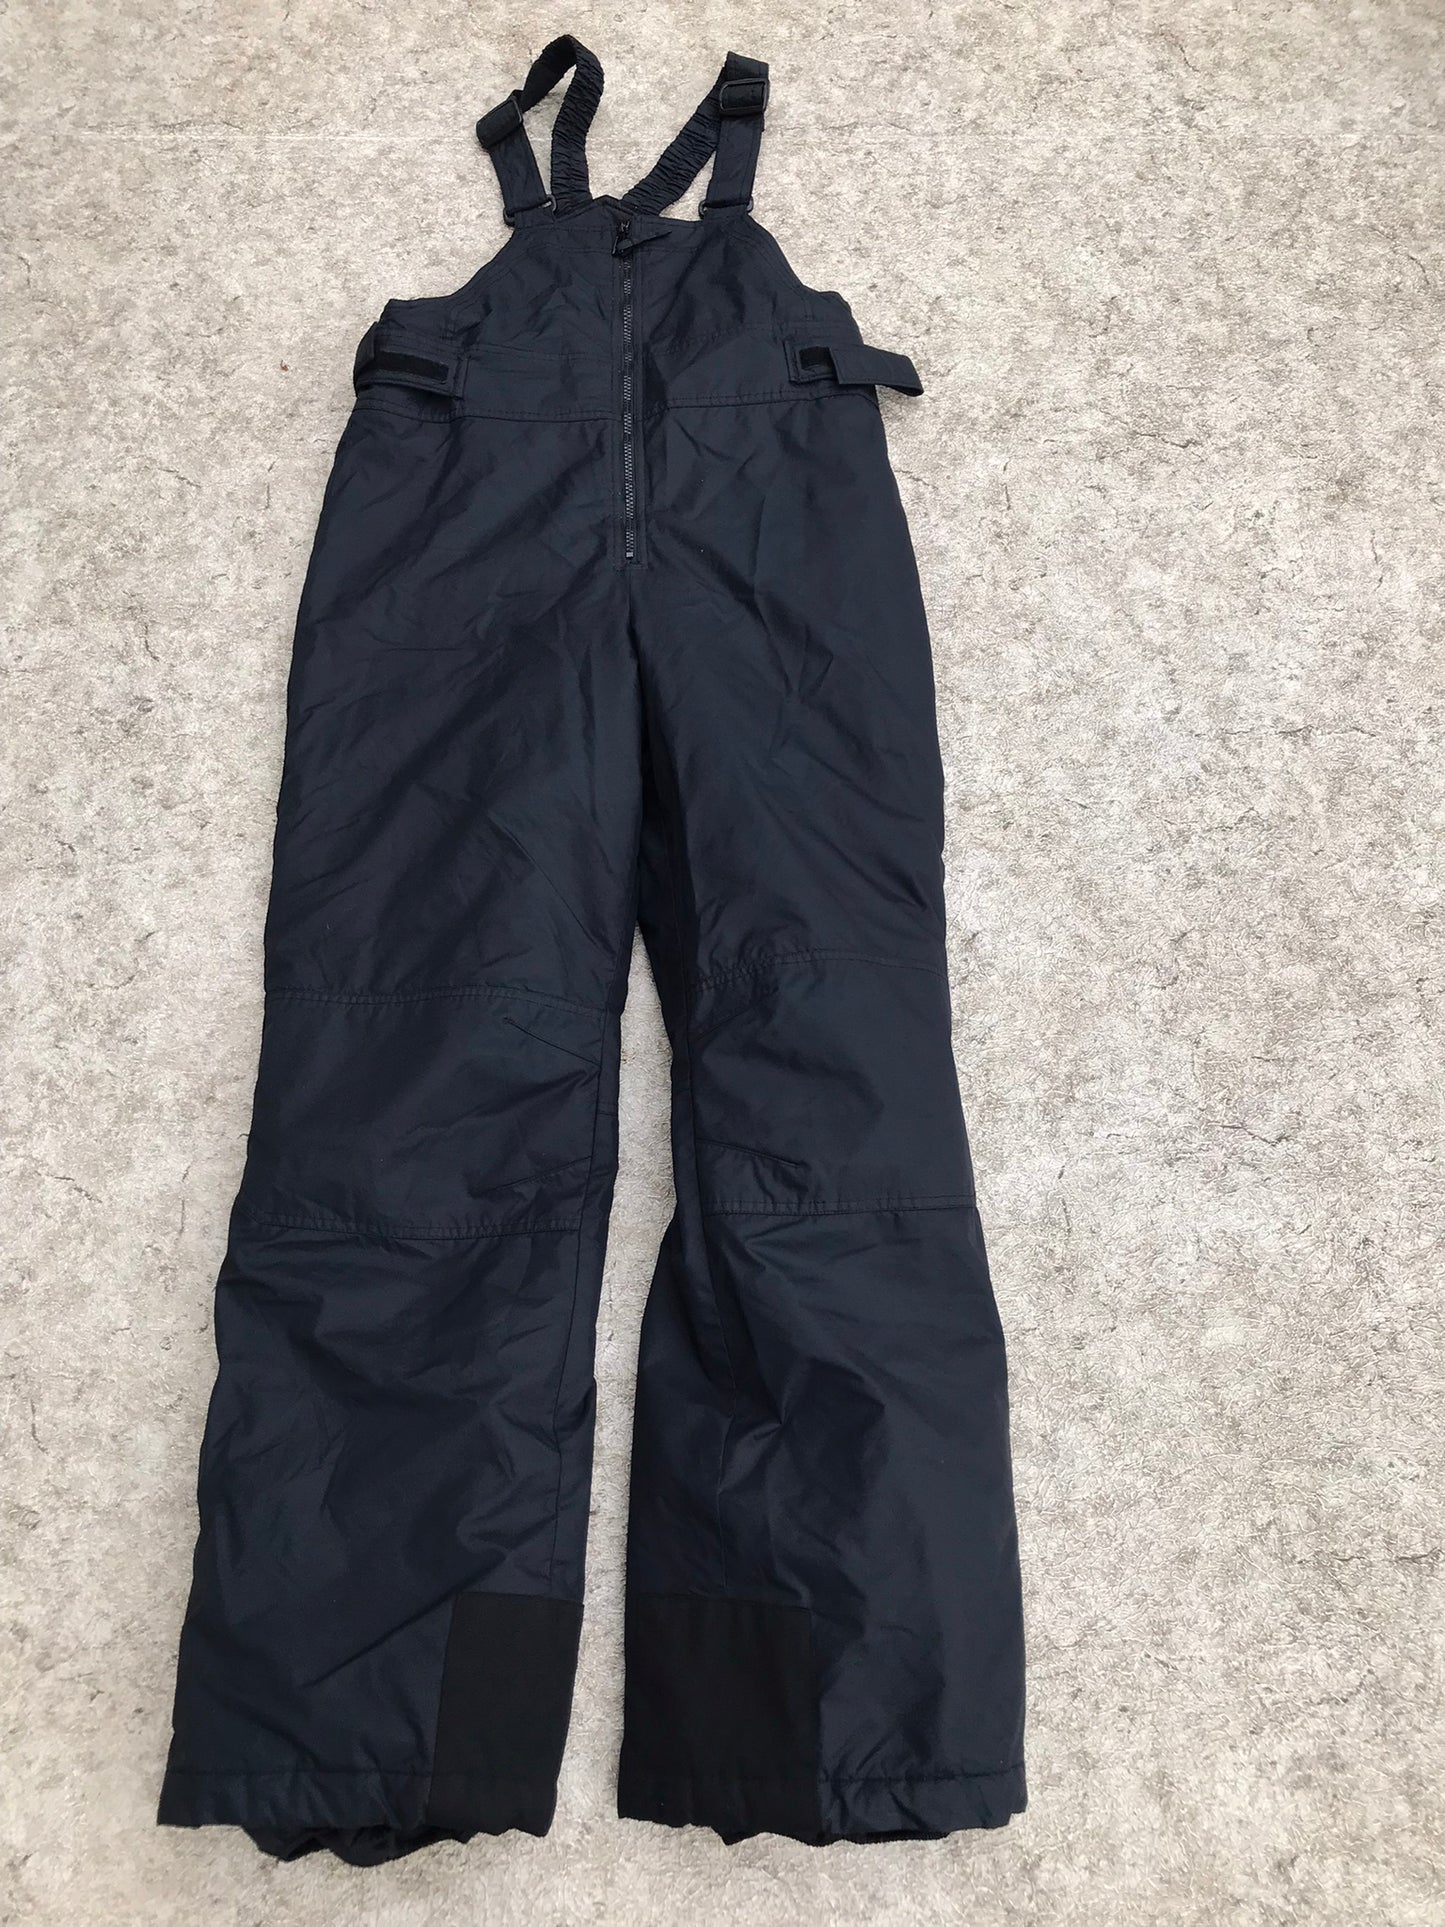 Snow Pants Child Size 16-18 Youth or Men's Small Columbia Black With Bib Outstanding Quality